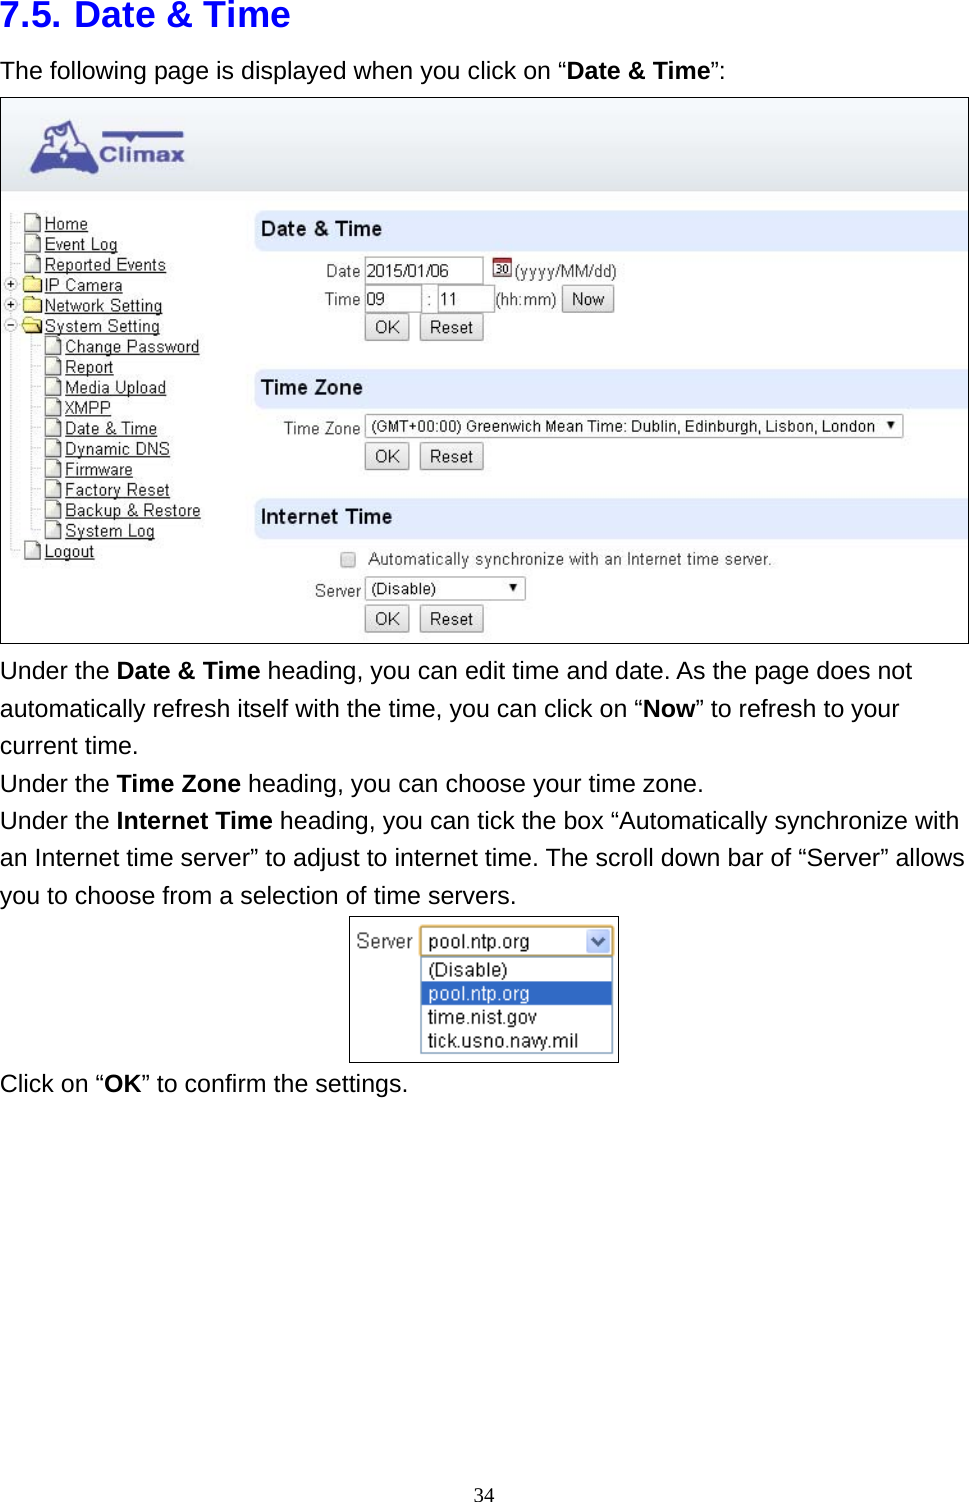 34  7.5. Date &amp; Time The following page is displayed when you click on “Date &amp; Time”:  Under the Date &amp; Time heading, you can edit time and date. As the page does not automatically refresh itself with the time, you can click on “Now” to refresh to your current time. Under the Time Zone heading, you can choose your time zone. Under the Internet Time heading, you can tick the box “Automatically synchronize with an Internet time server” to adjust to internet time. The scroll down bar of “Server” allows you to choose from a selection of time servers.  Click on “OK” to confirm the settings.  